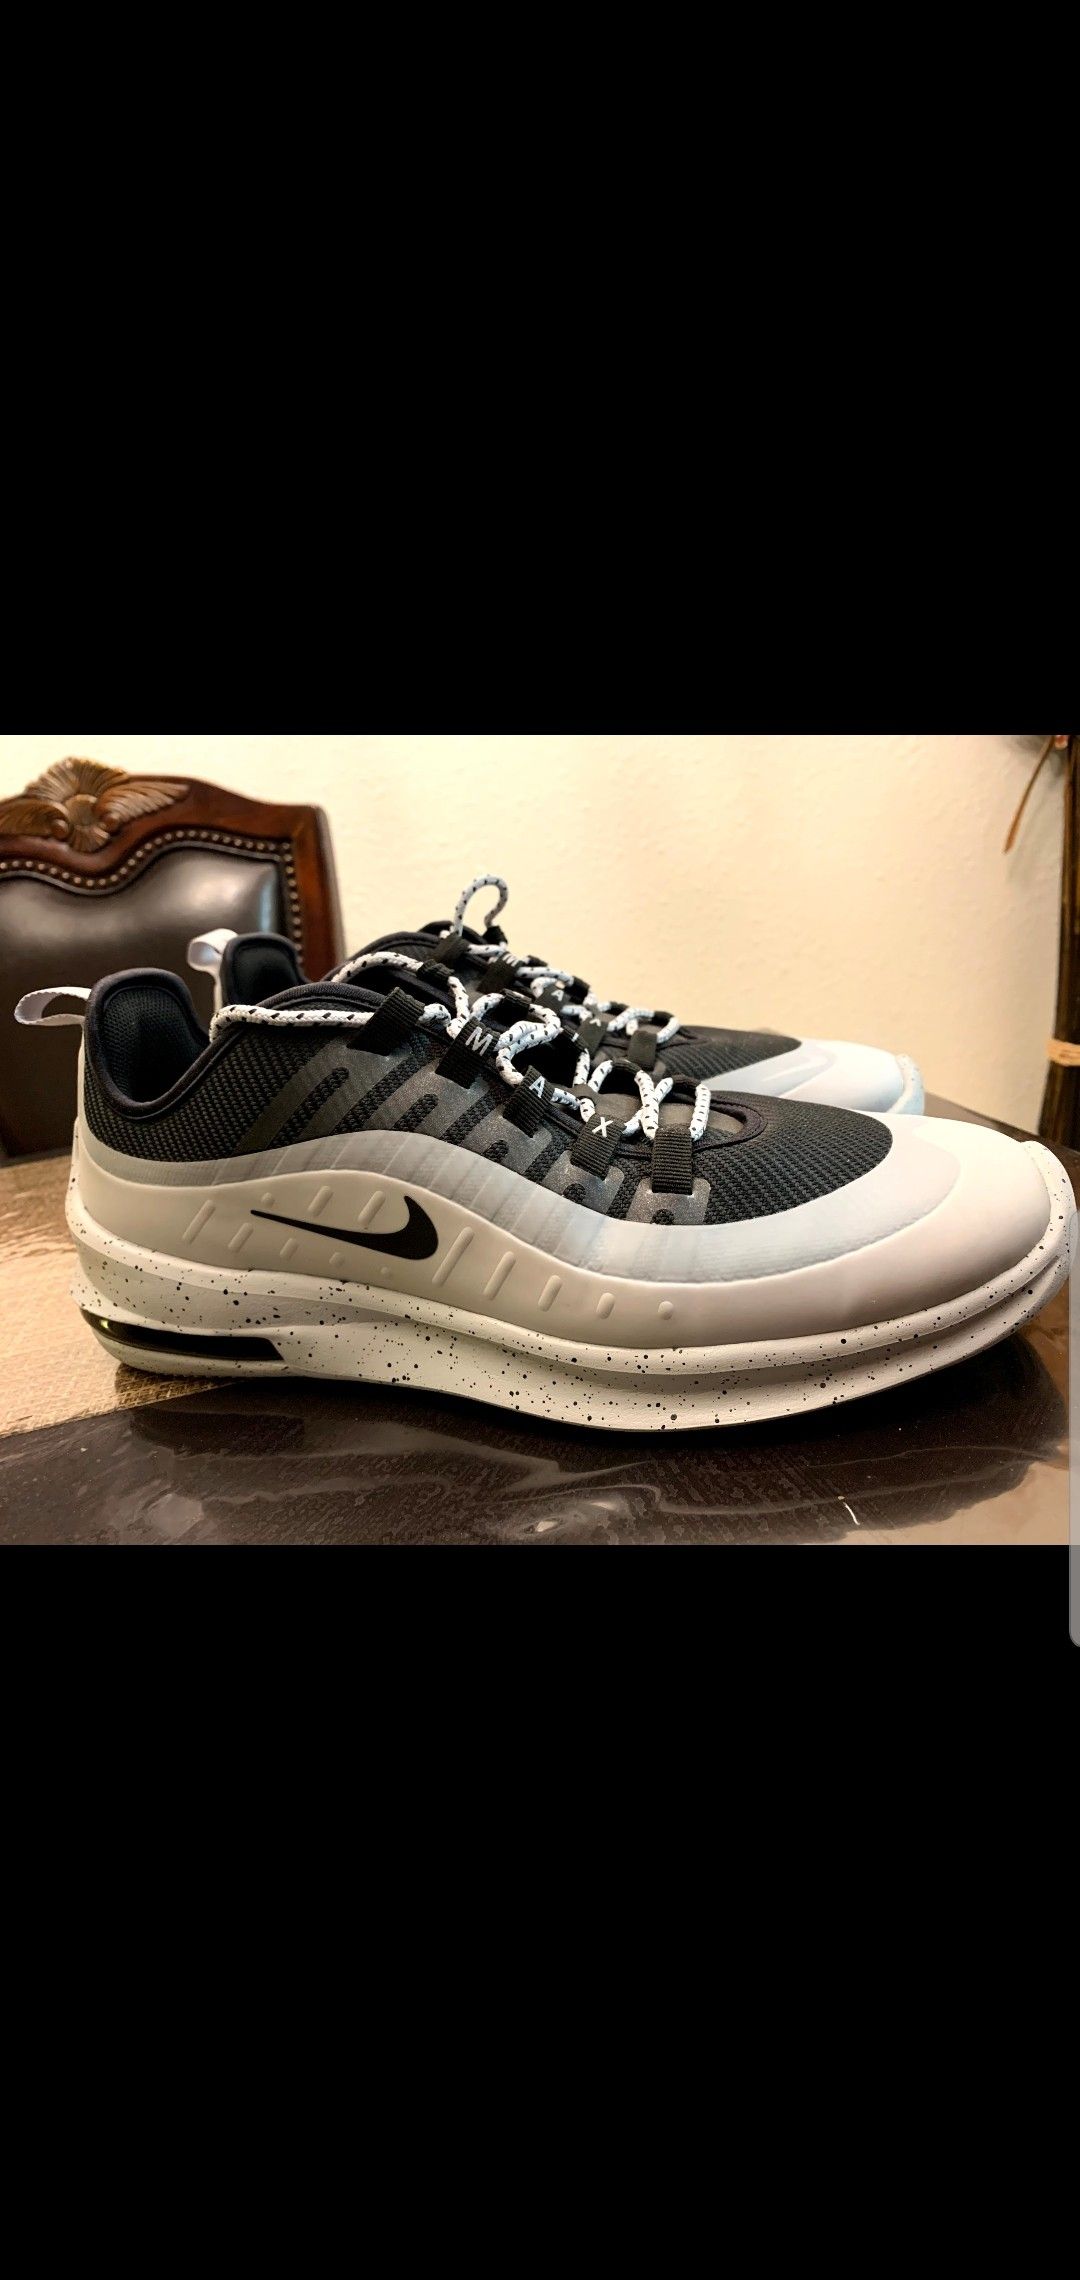 Nike's for mens size 12